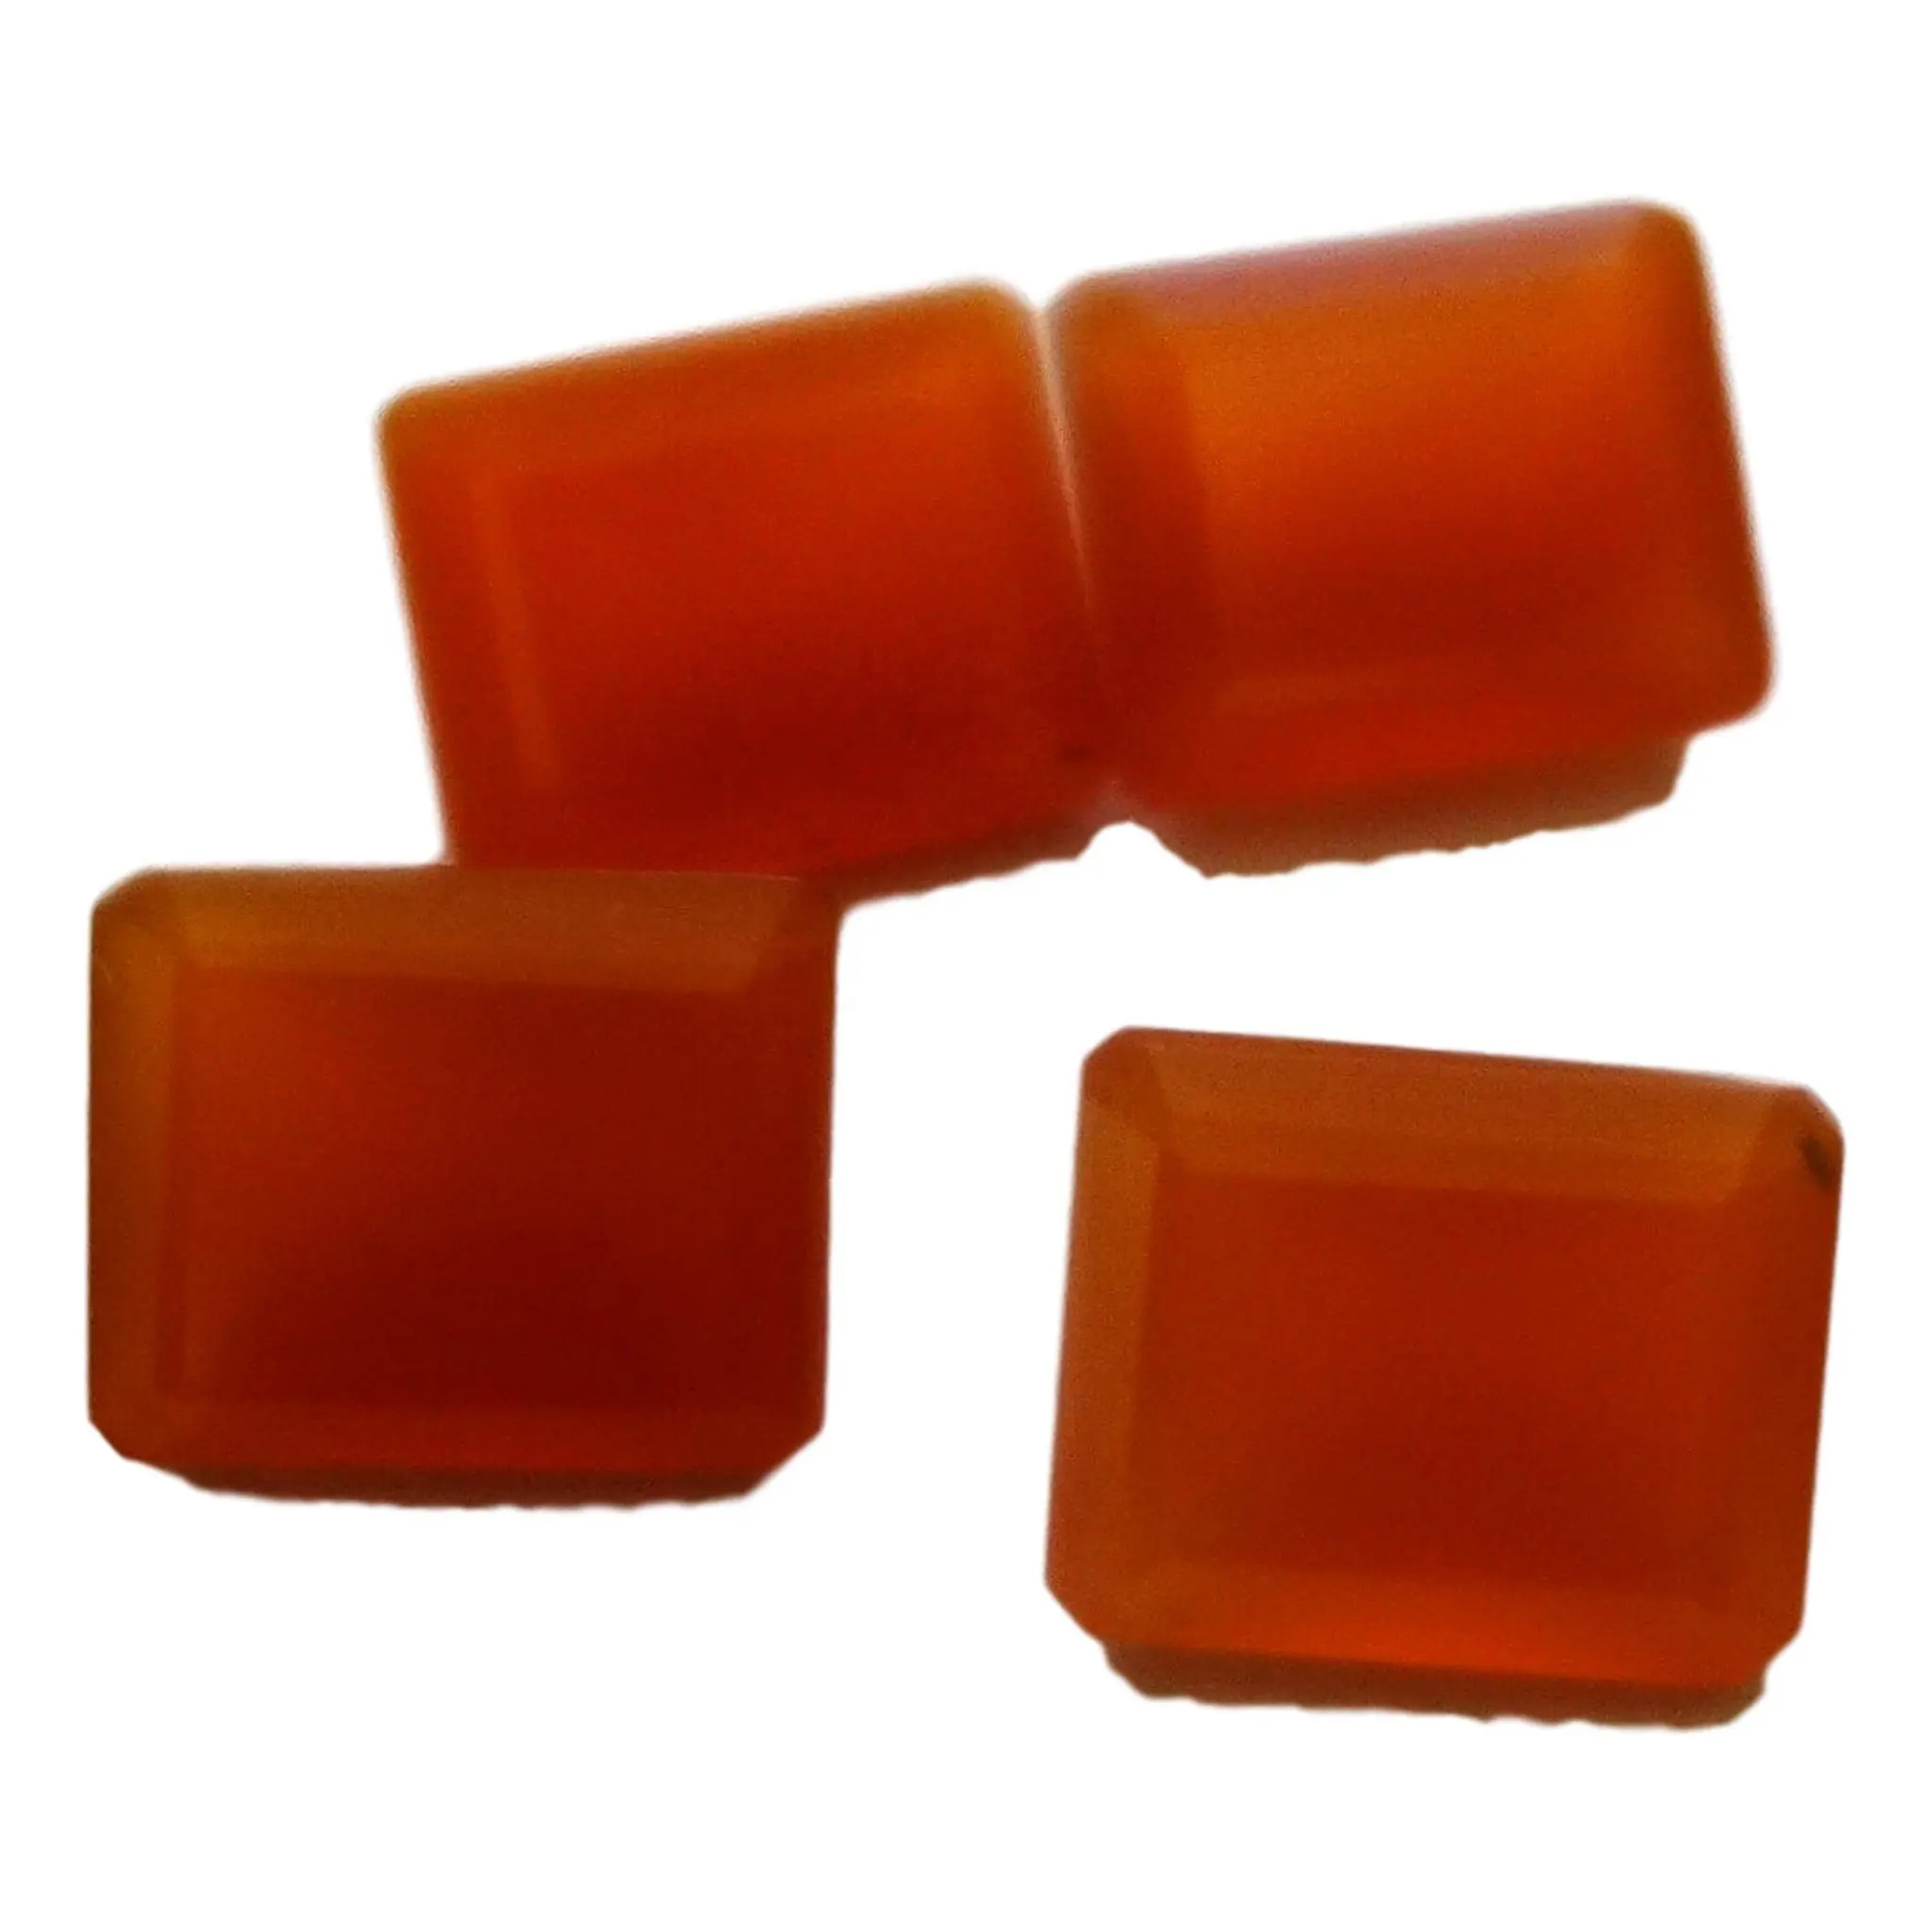 Faceted Orange Chalcedony Emerald Cut All Shapes And Sizes Cut On Custom Orders In Wholesale Prices In All Other Types Of Natura